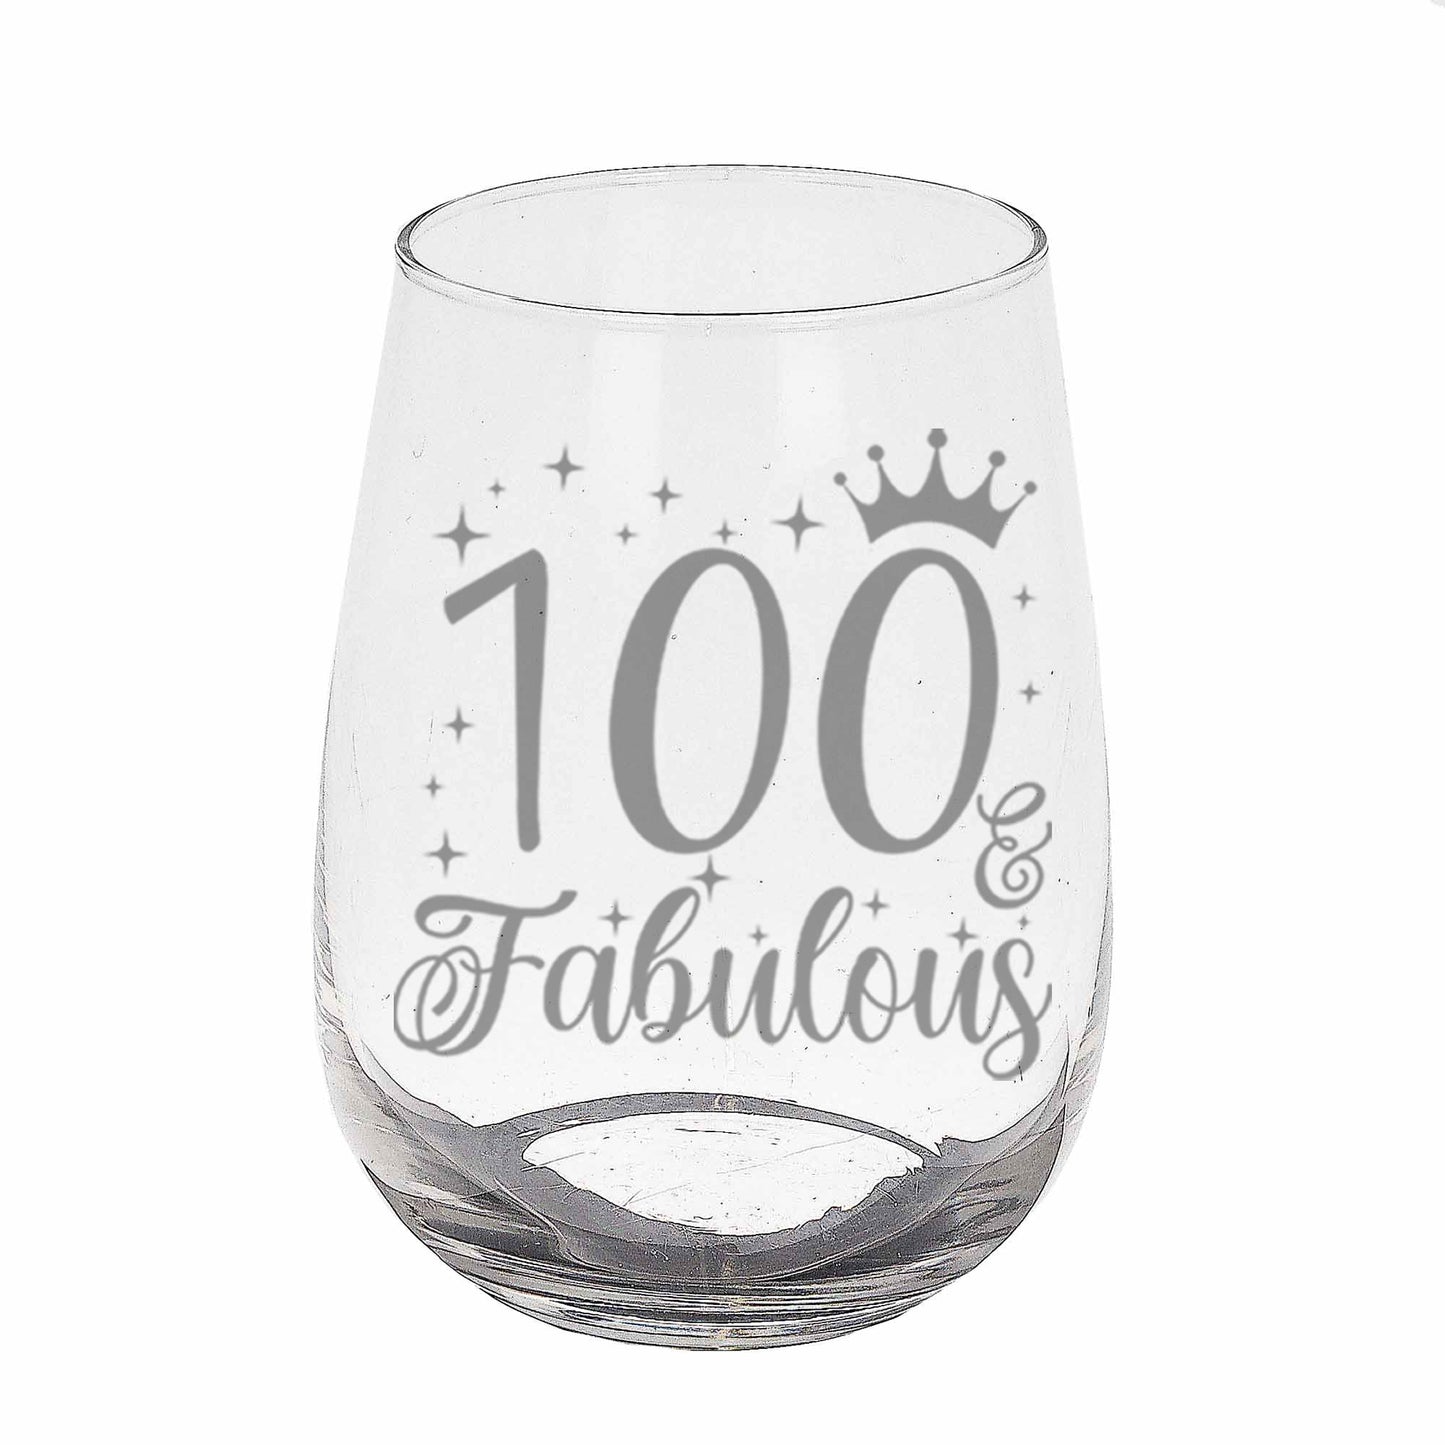 100 & Fabulous Engraved Stemless Gin Glass and/or Coaster Set  - Always Looking Good - Stemless Gin Glass On Its Own  